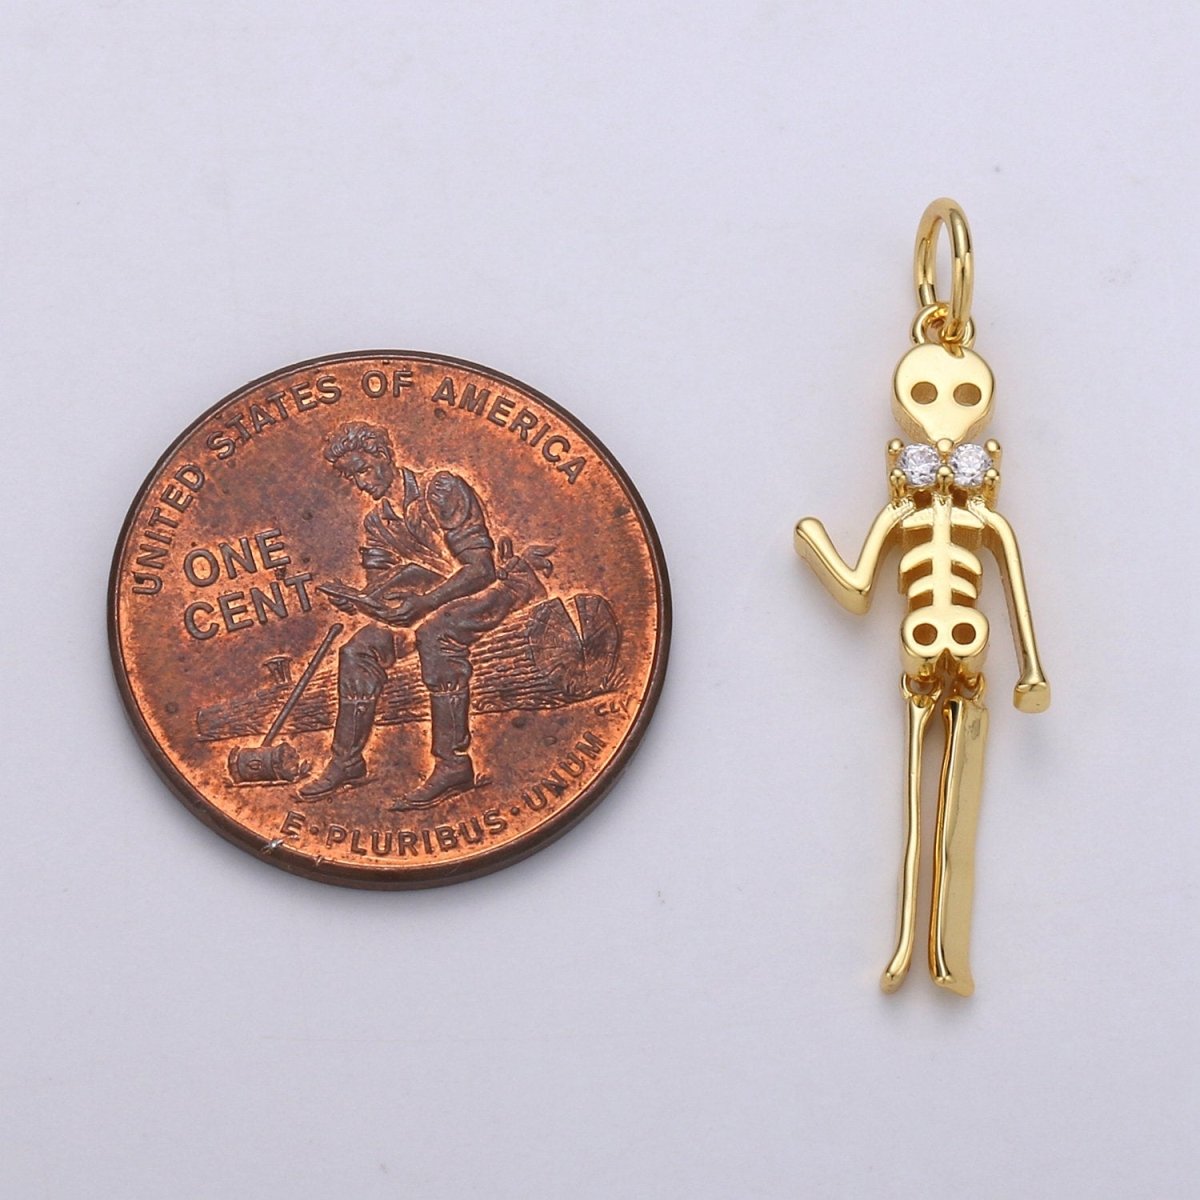 Day of the Dead Charm - Dia de los Muertos Pendant - Miniature Skeleton Gold Skull Charm for Halloween Necklace Jewelry Supply D-684 D-691 - DLUXCA